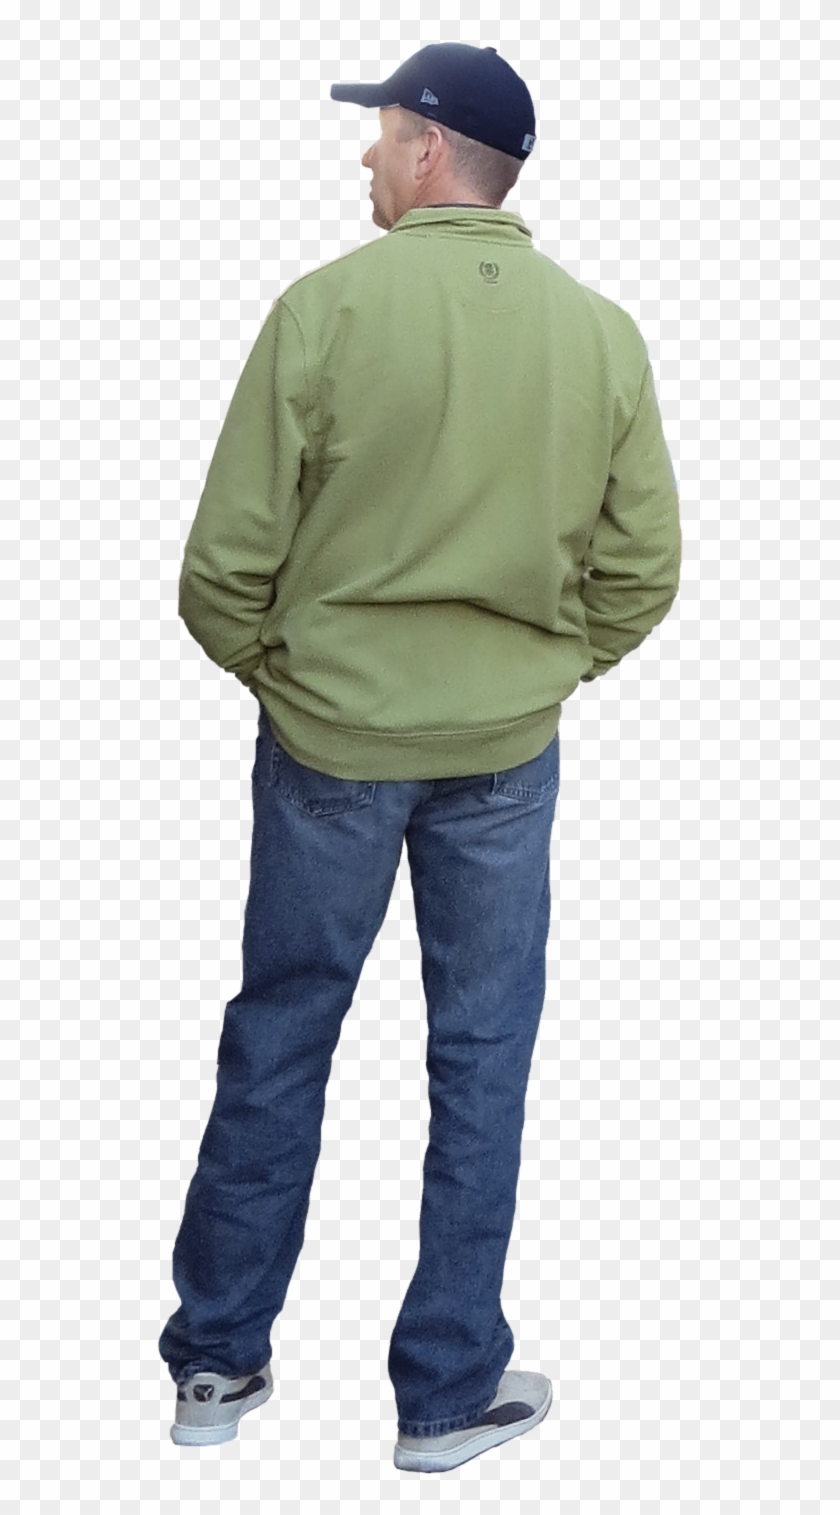 1434 X 1434 10 - People From Behind Png Clipart #1203009